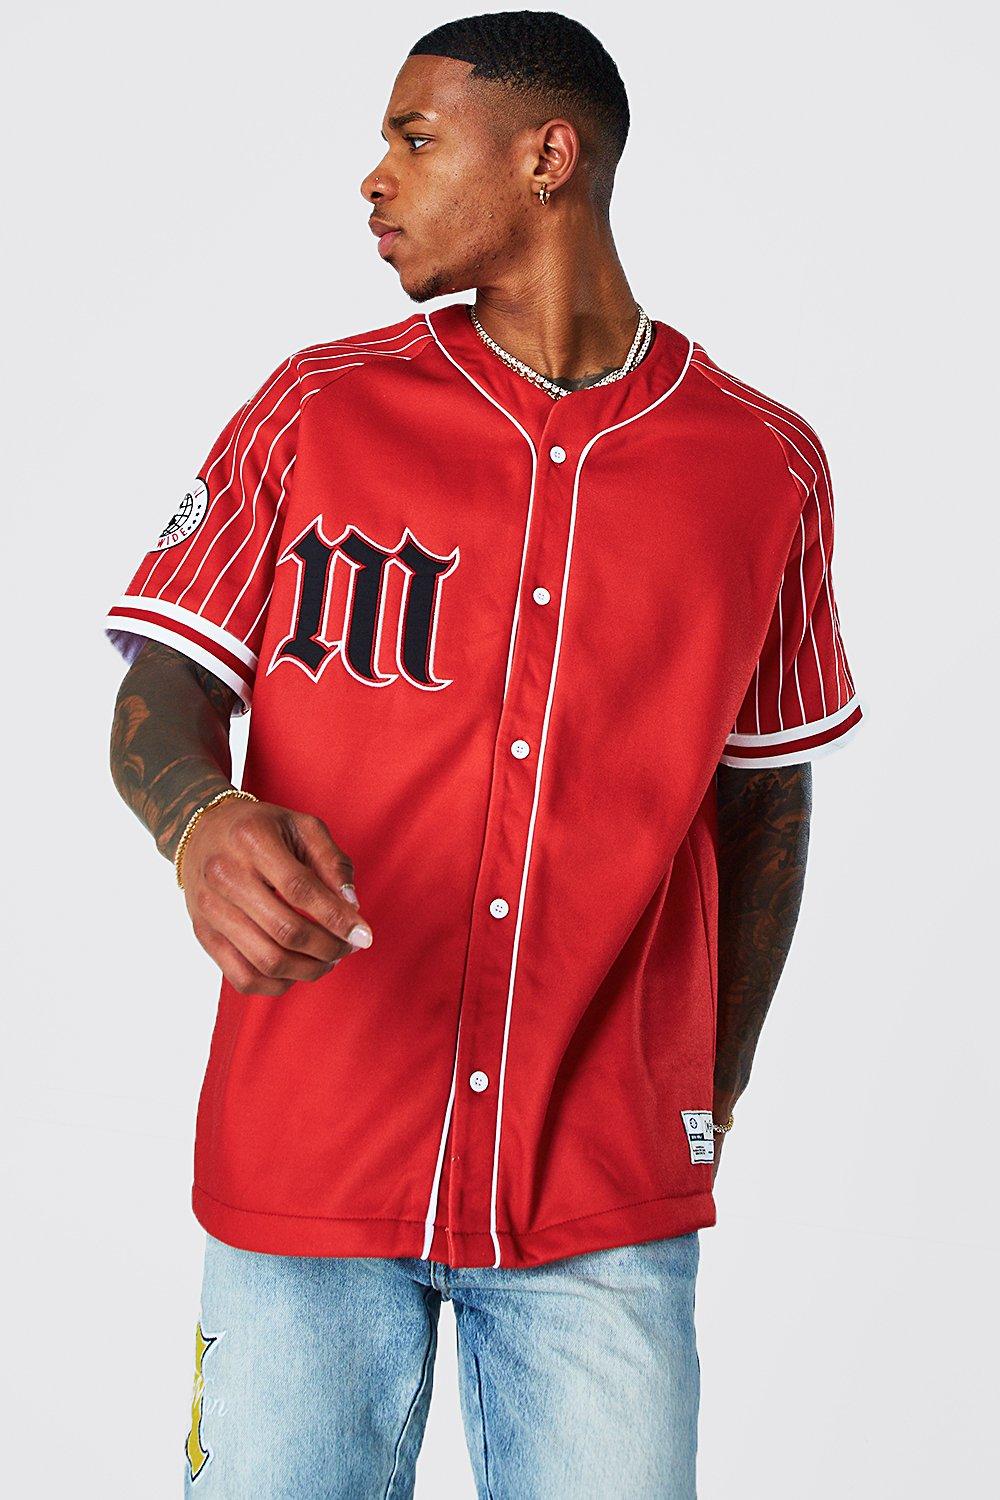 Plus Size Men's Embroidered Striped/letters Graphic Print Baseball Shirt  For Sports/running/baseball, Trendy Oversized Loose Fit Short Sleeve Jersey  For Big & Tall Males, Men's Clothing - Temu Austria